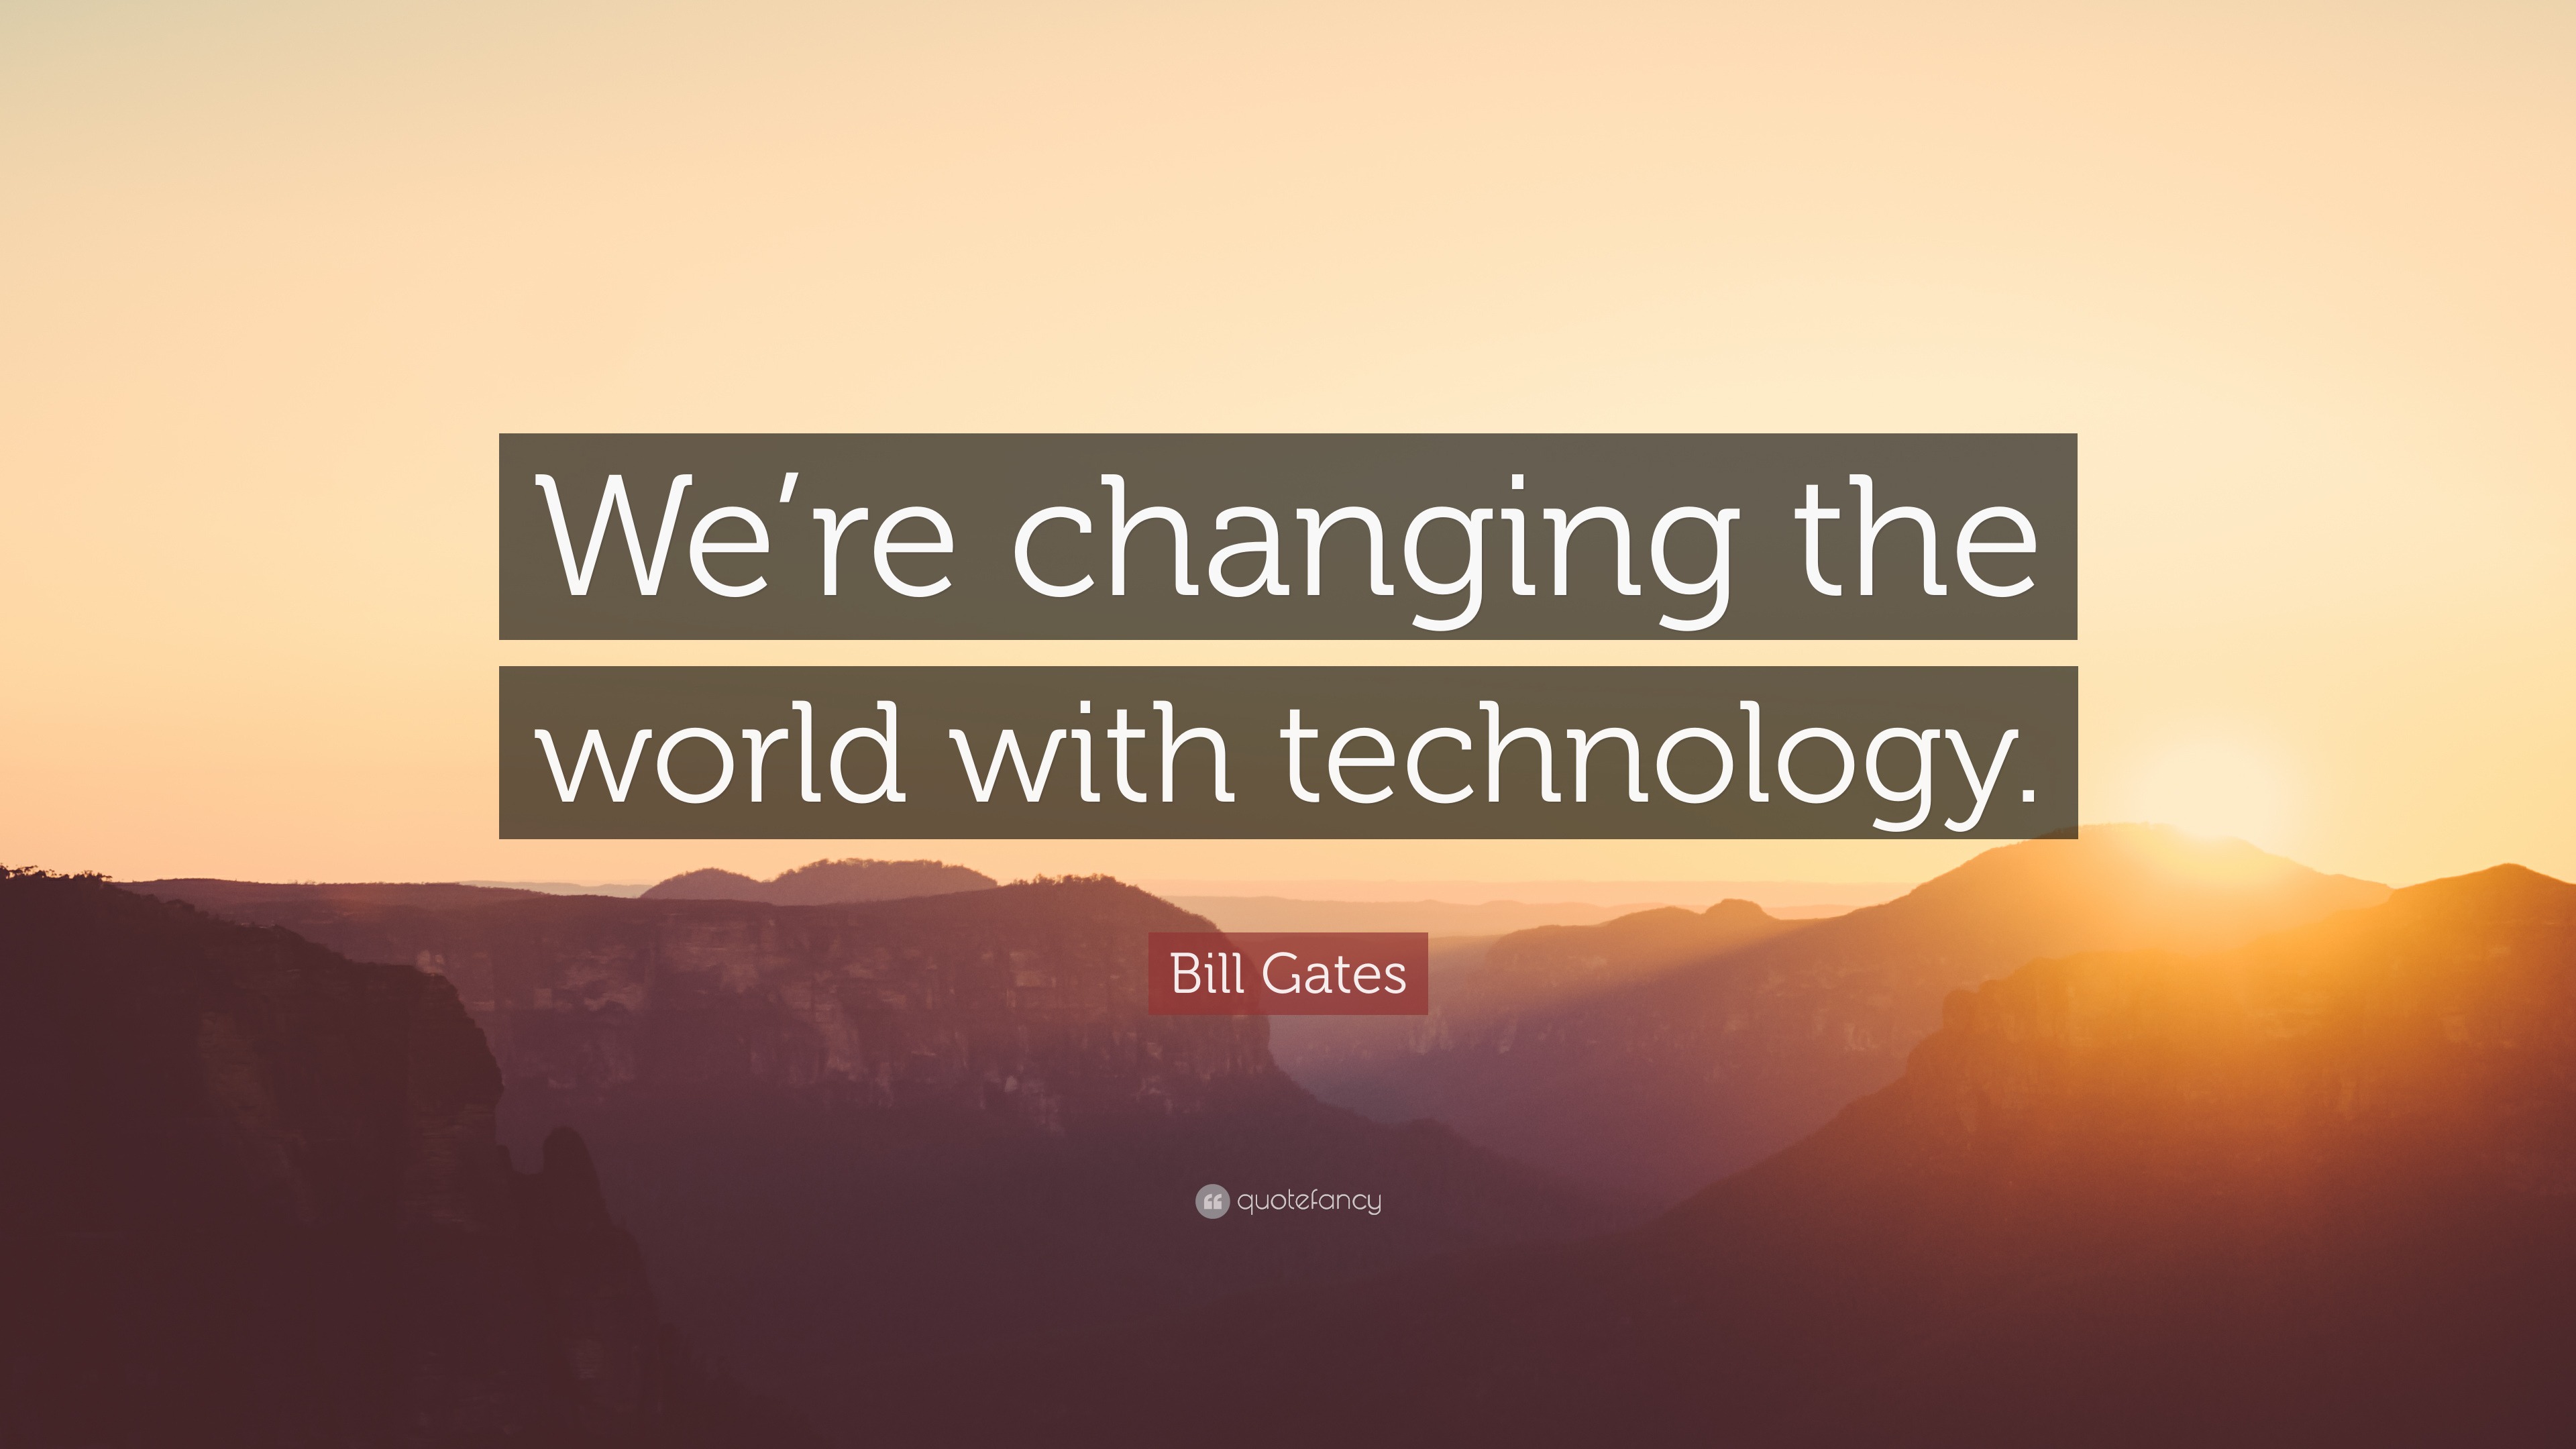 Bill Gates Quote: “We’re changing the world with technology.”